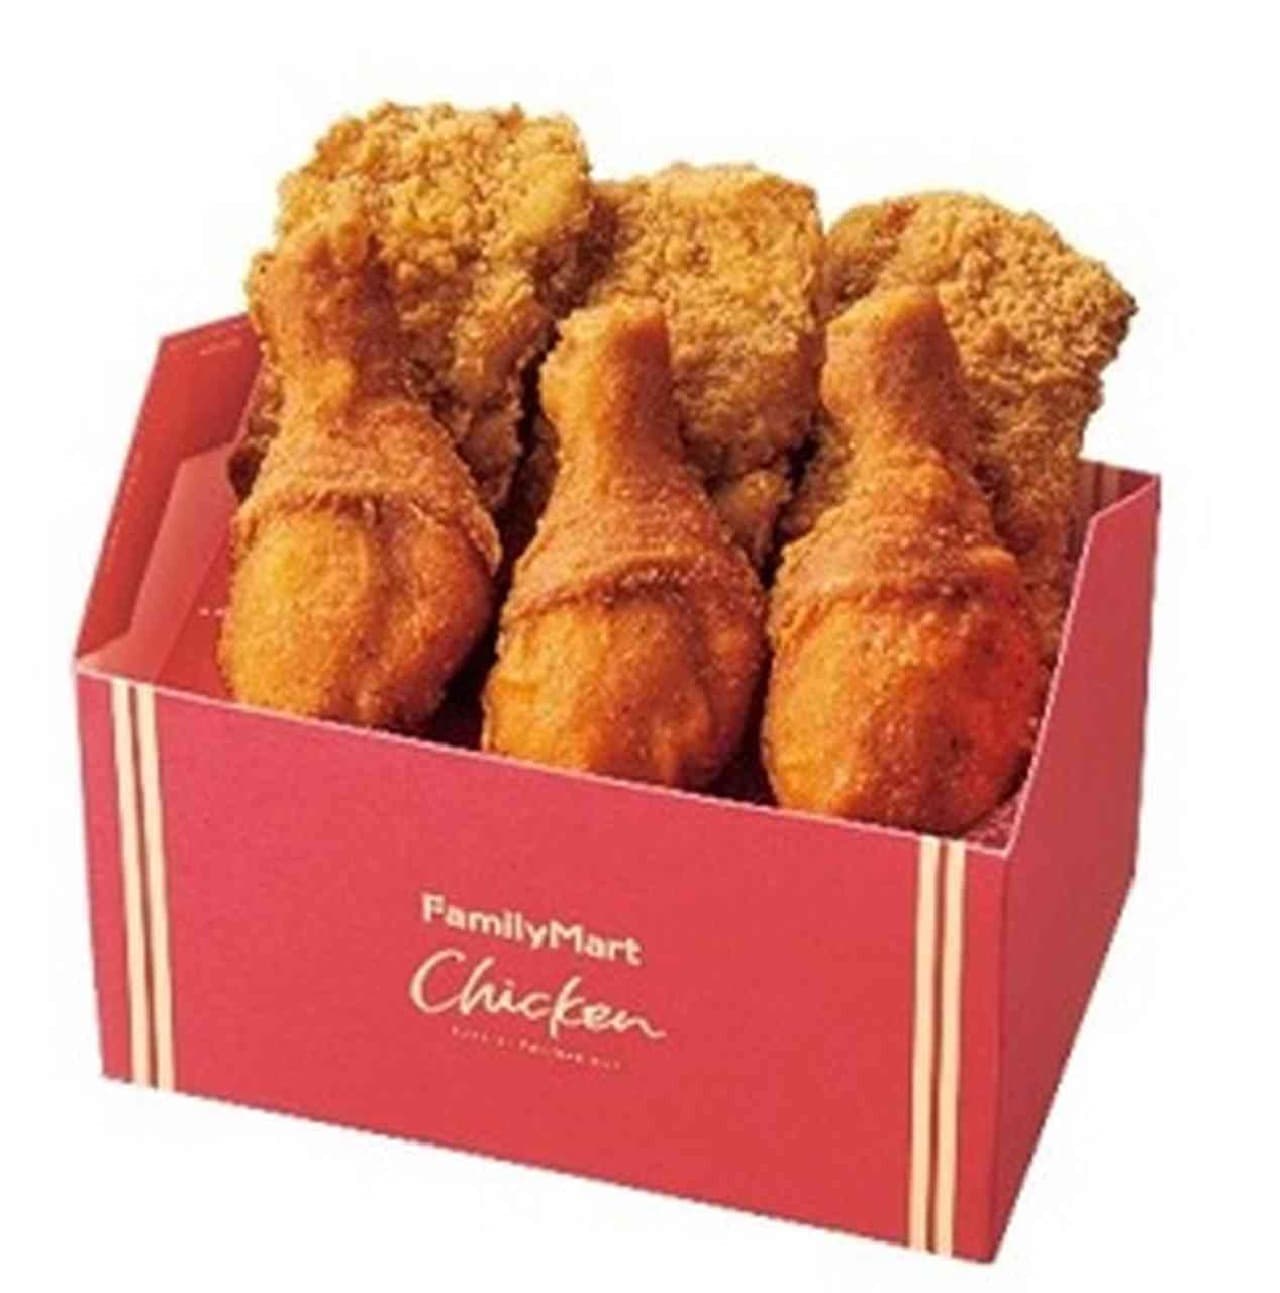 Famima Christmas limited edition chicken products